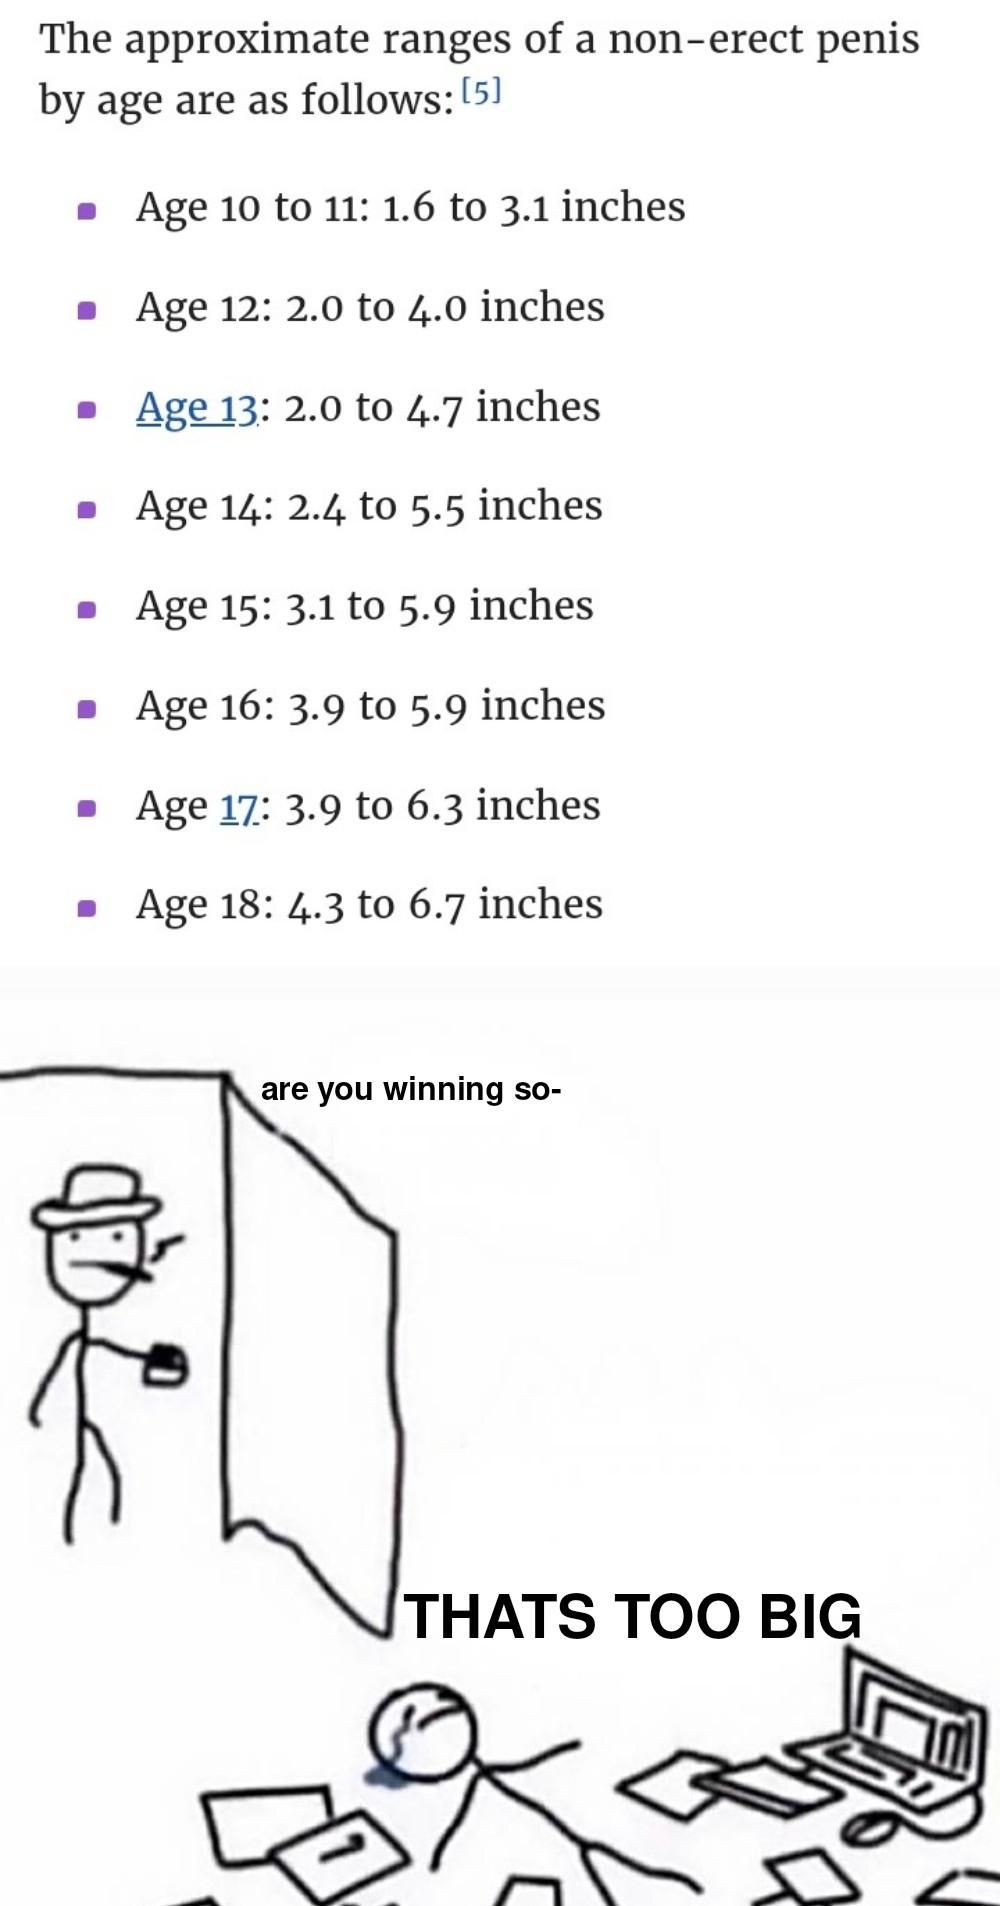 3 inches is perfectly average at age 18.